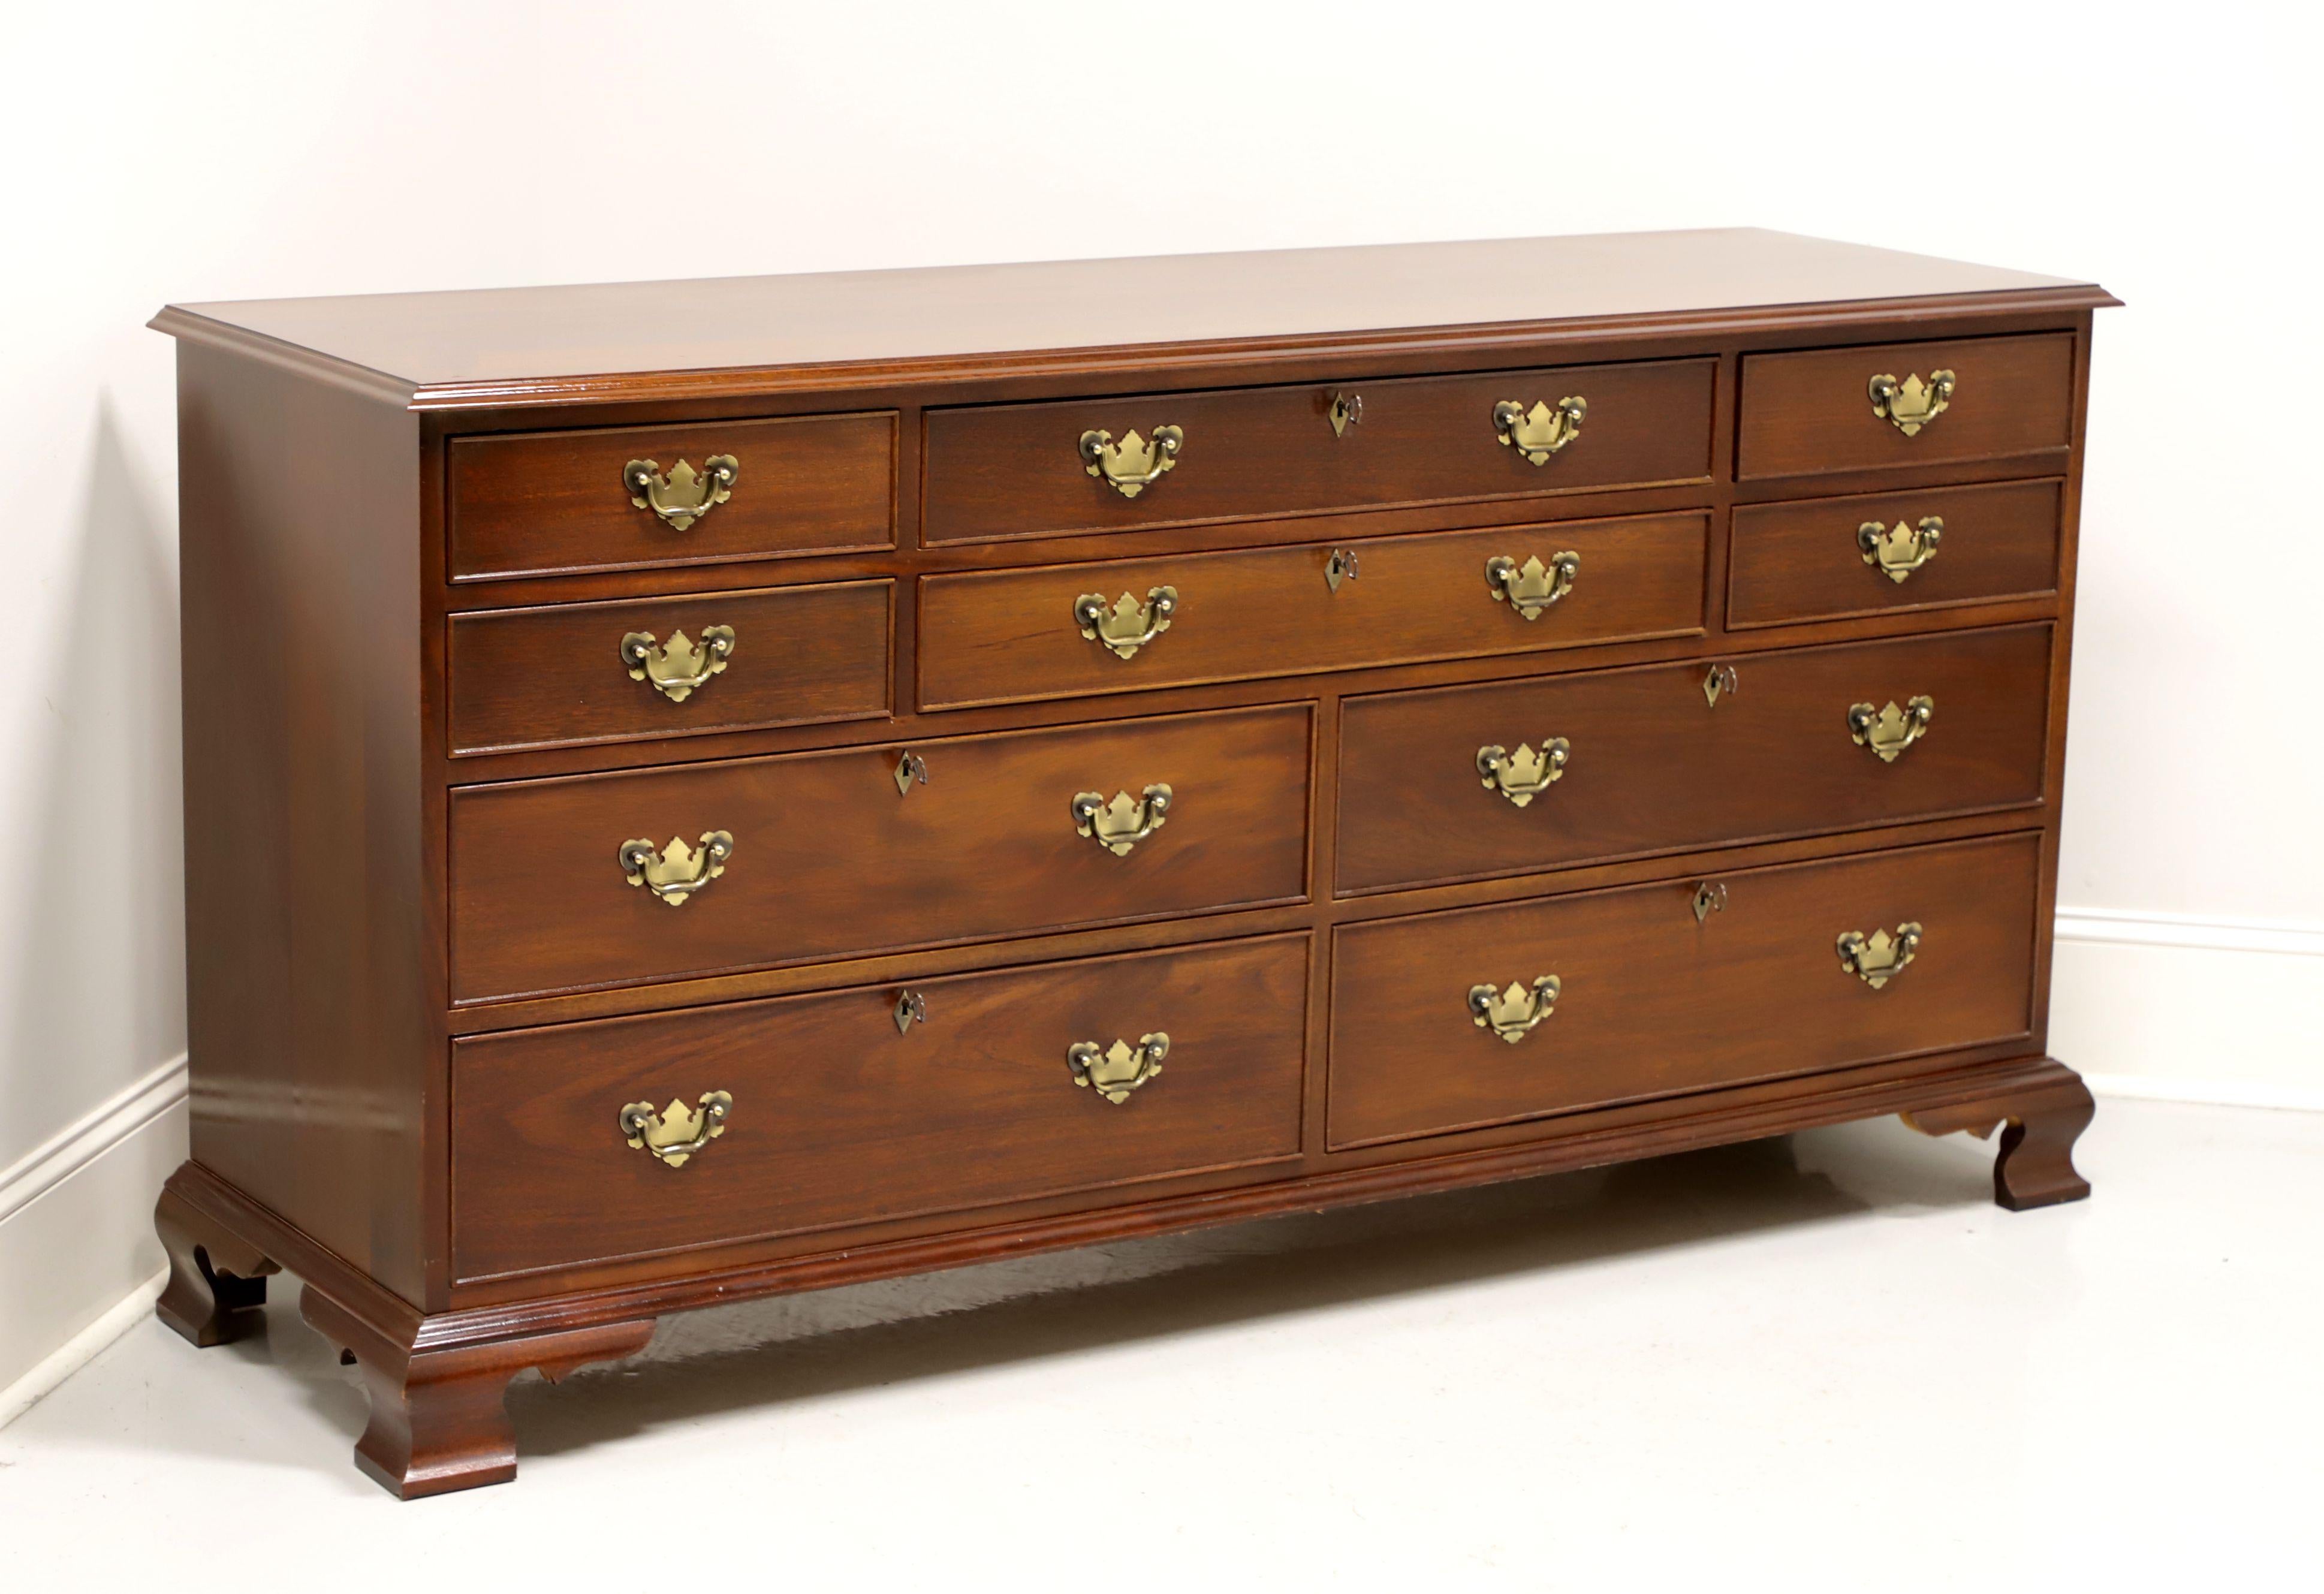 CRAFTIQUE Solid Mahogany Chippendale Style Triple Dresser W/ Ogee Feet 4